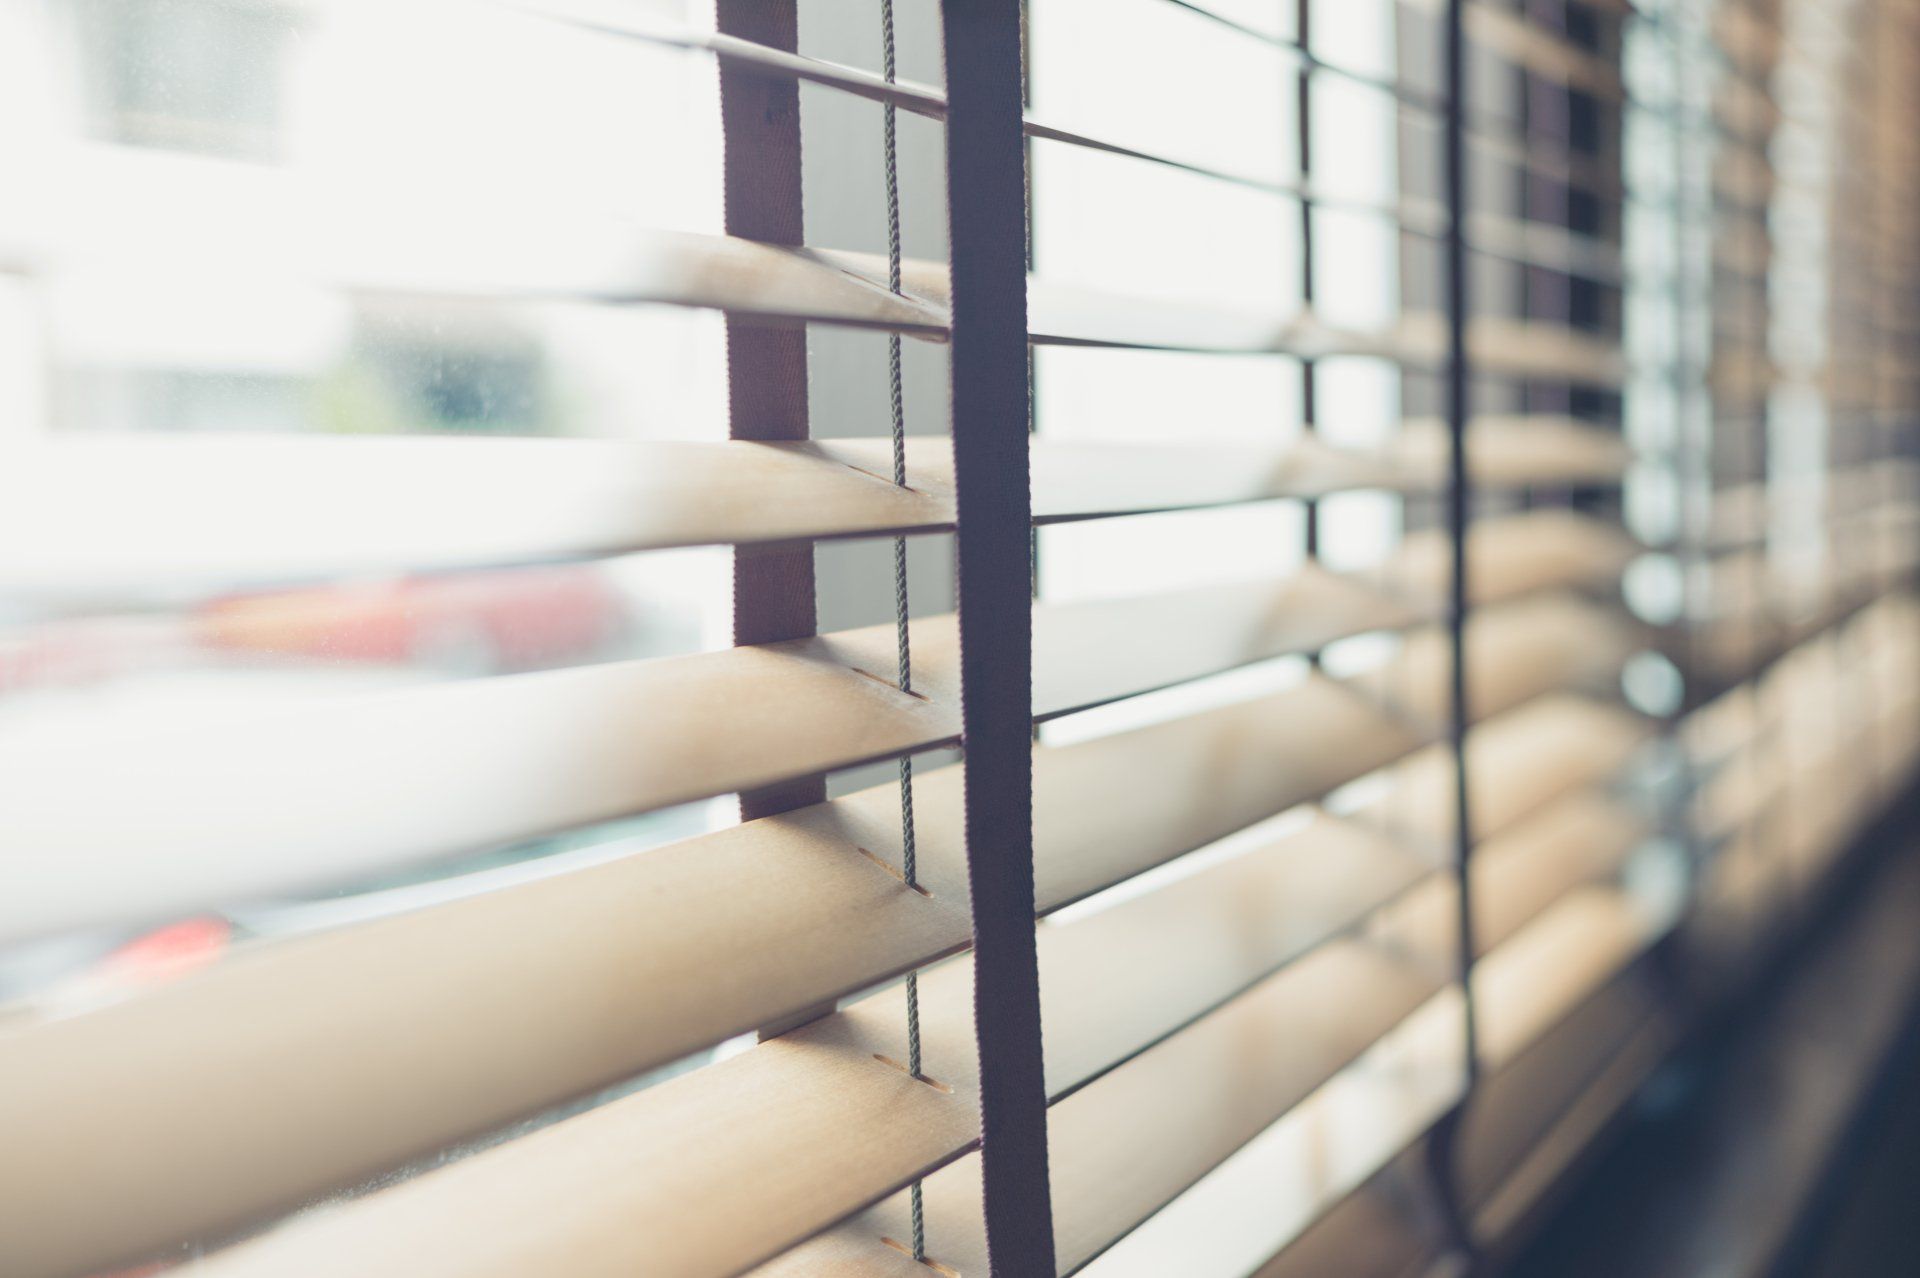 Close up of timber venetian blinds, open with blurred view out window.